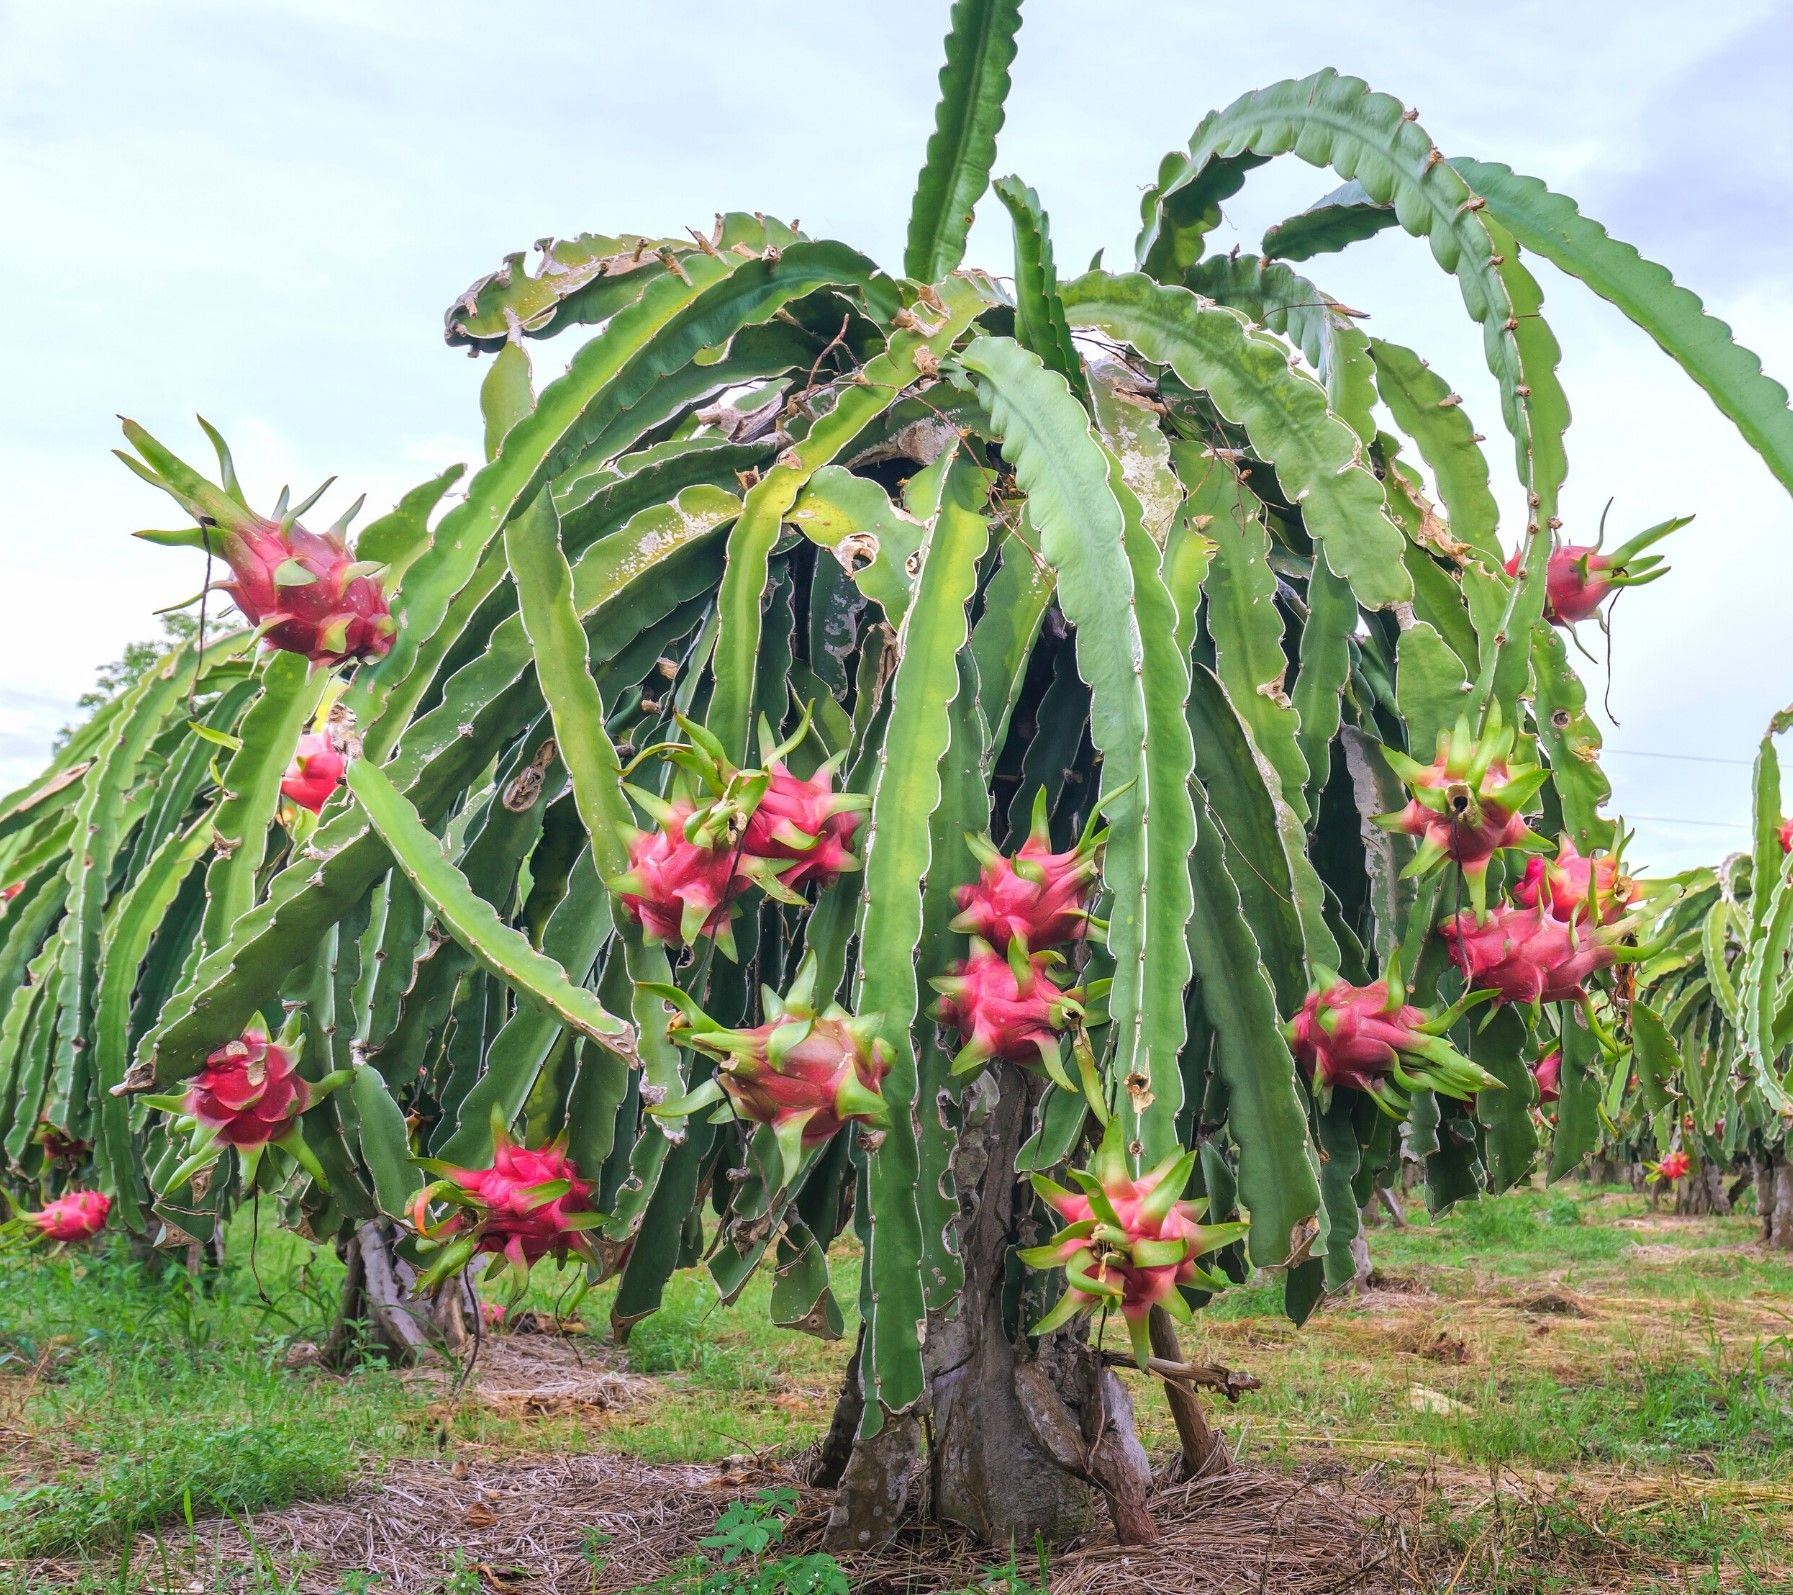 The government provides a subsidy of Rs 35,000 for dragon fruit farming